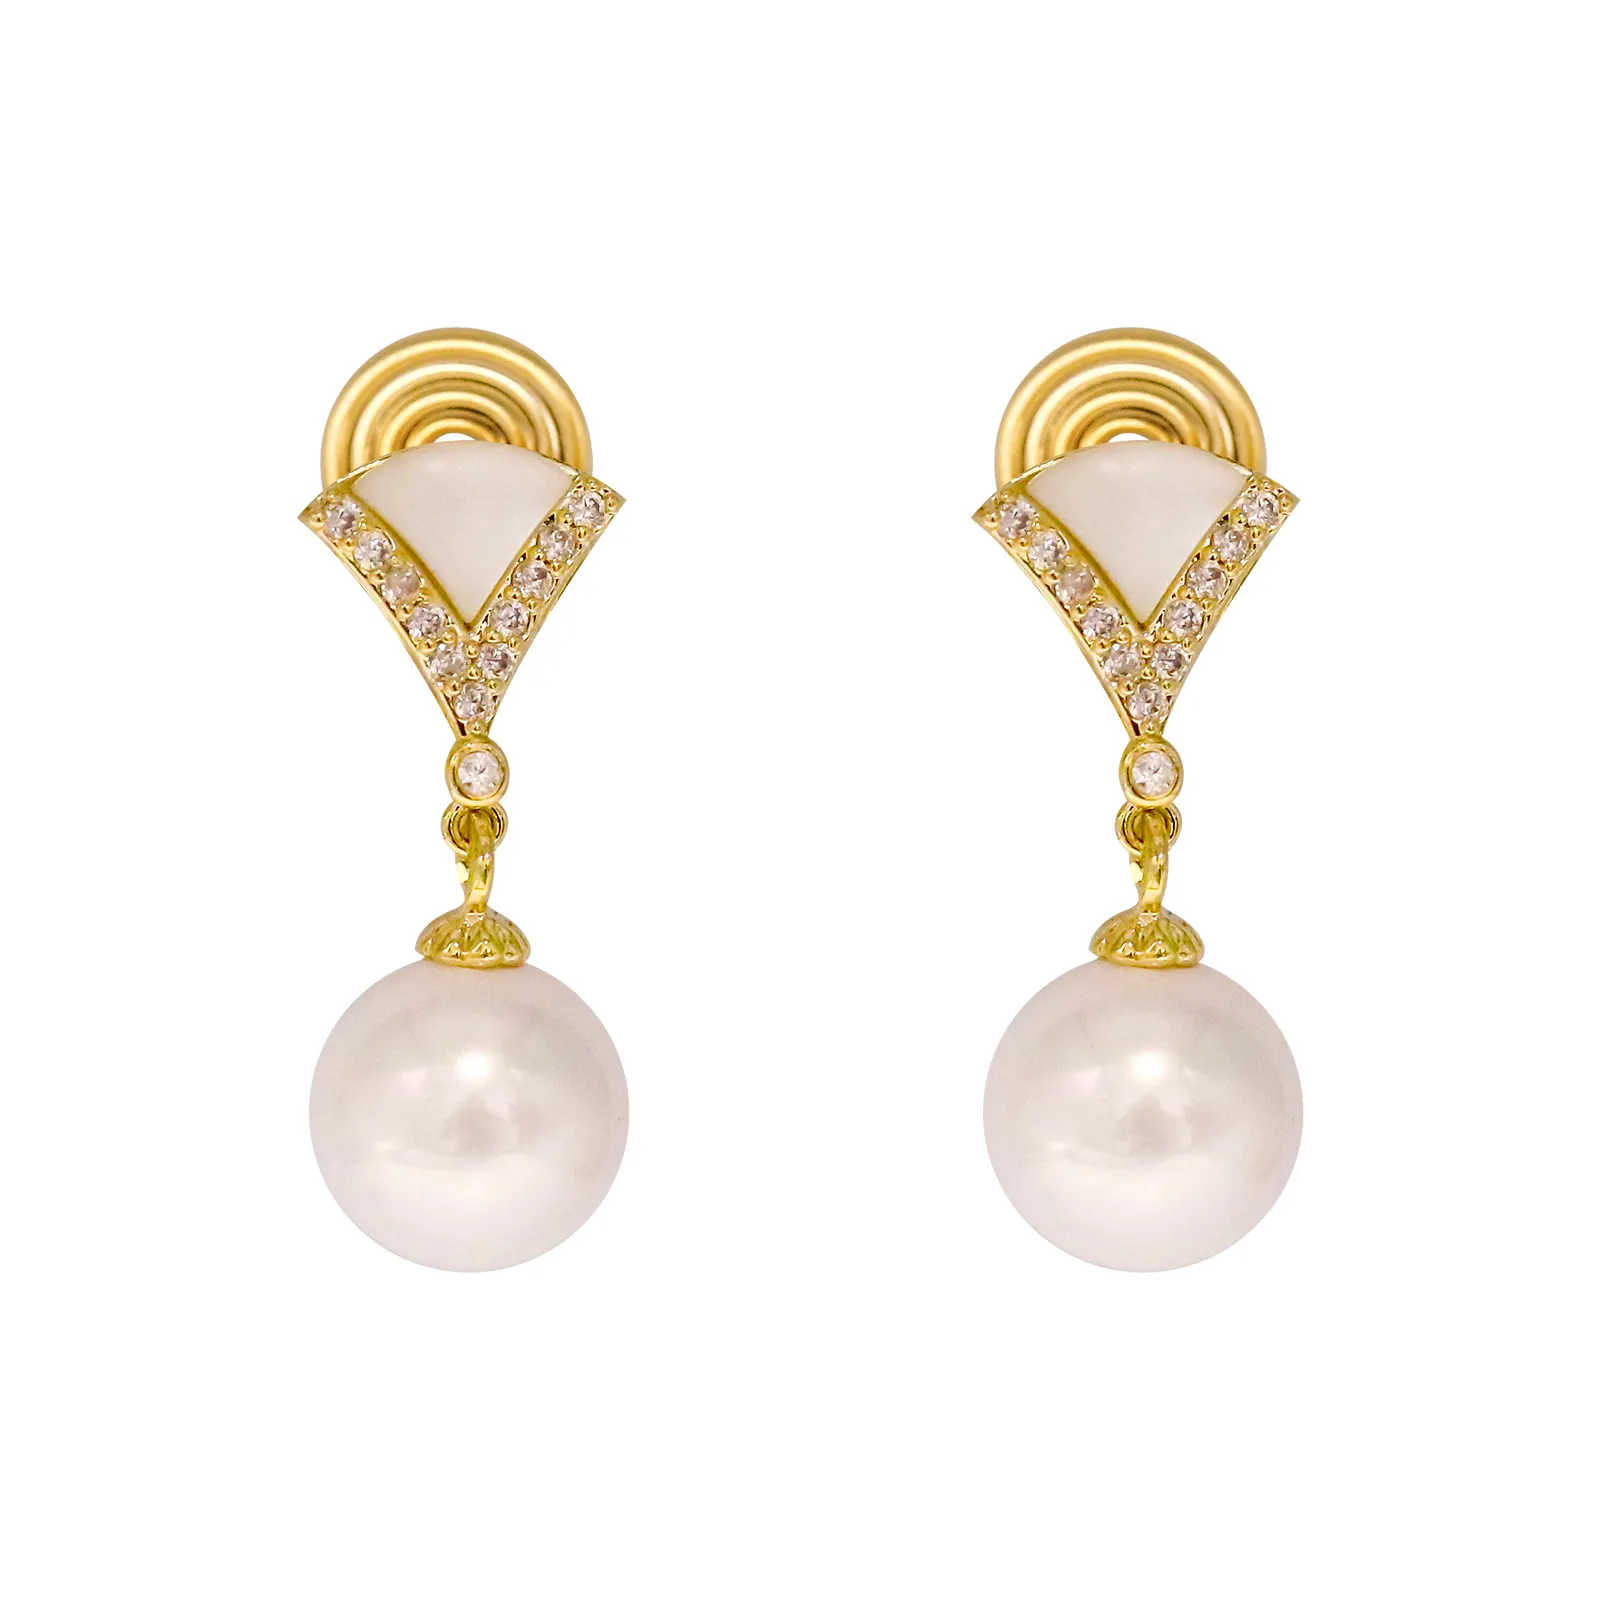 2023 Fashion Jewelry Wholesale Fan-shaped 14k Gold Plated Pearl Pendant Clip On Earrings Unique Design For Women